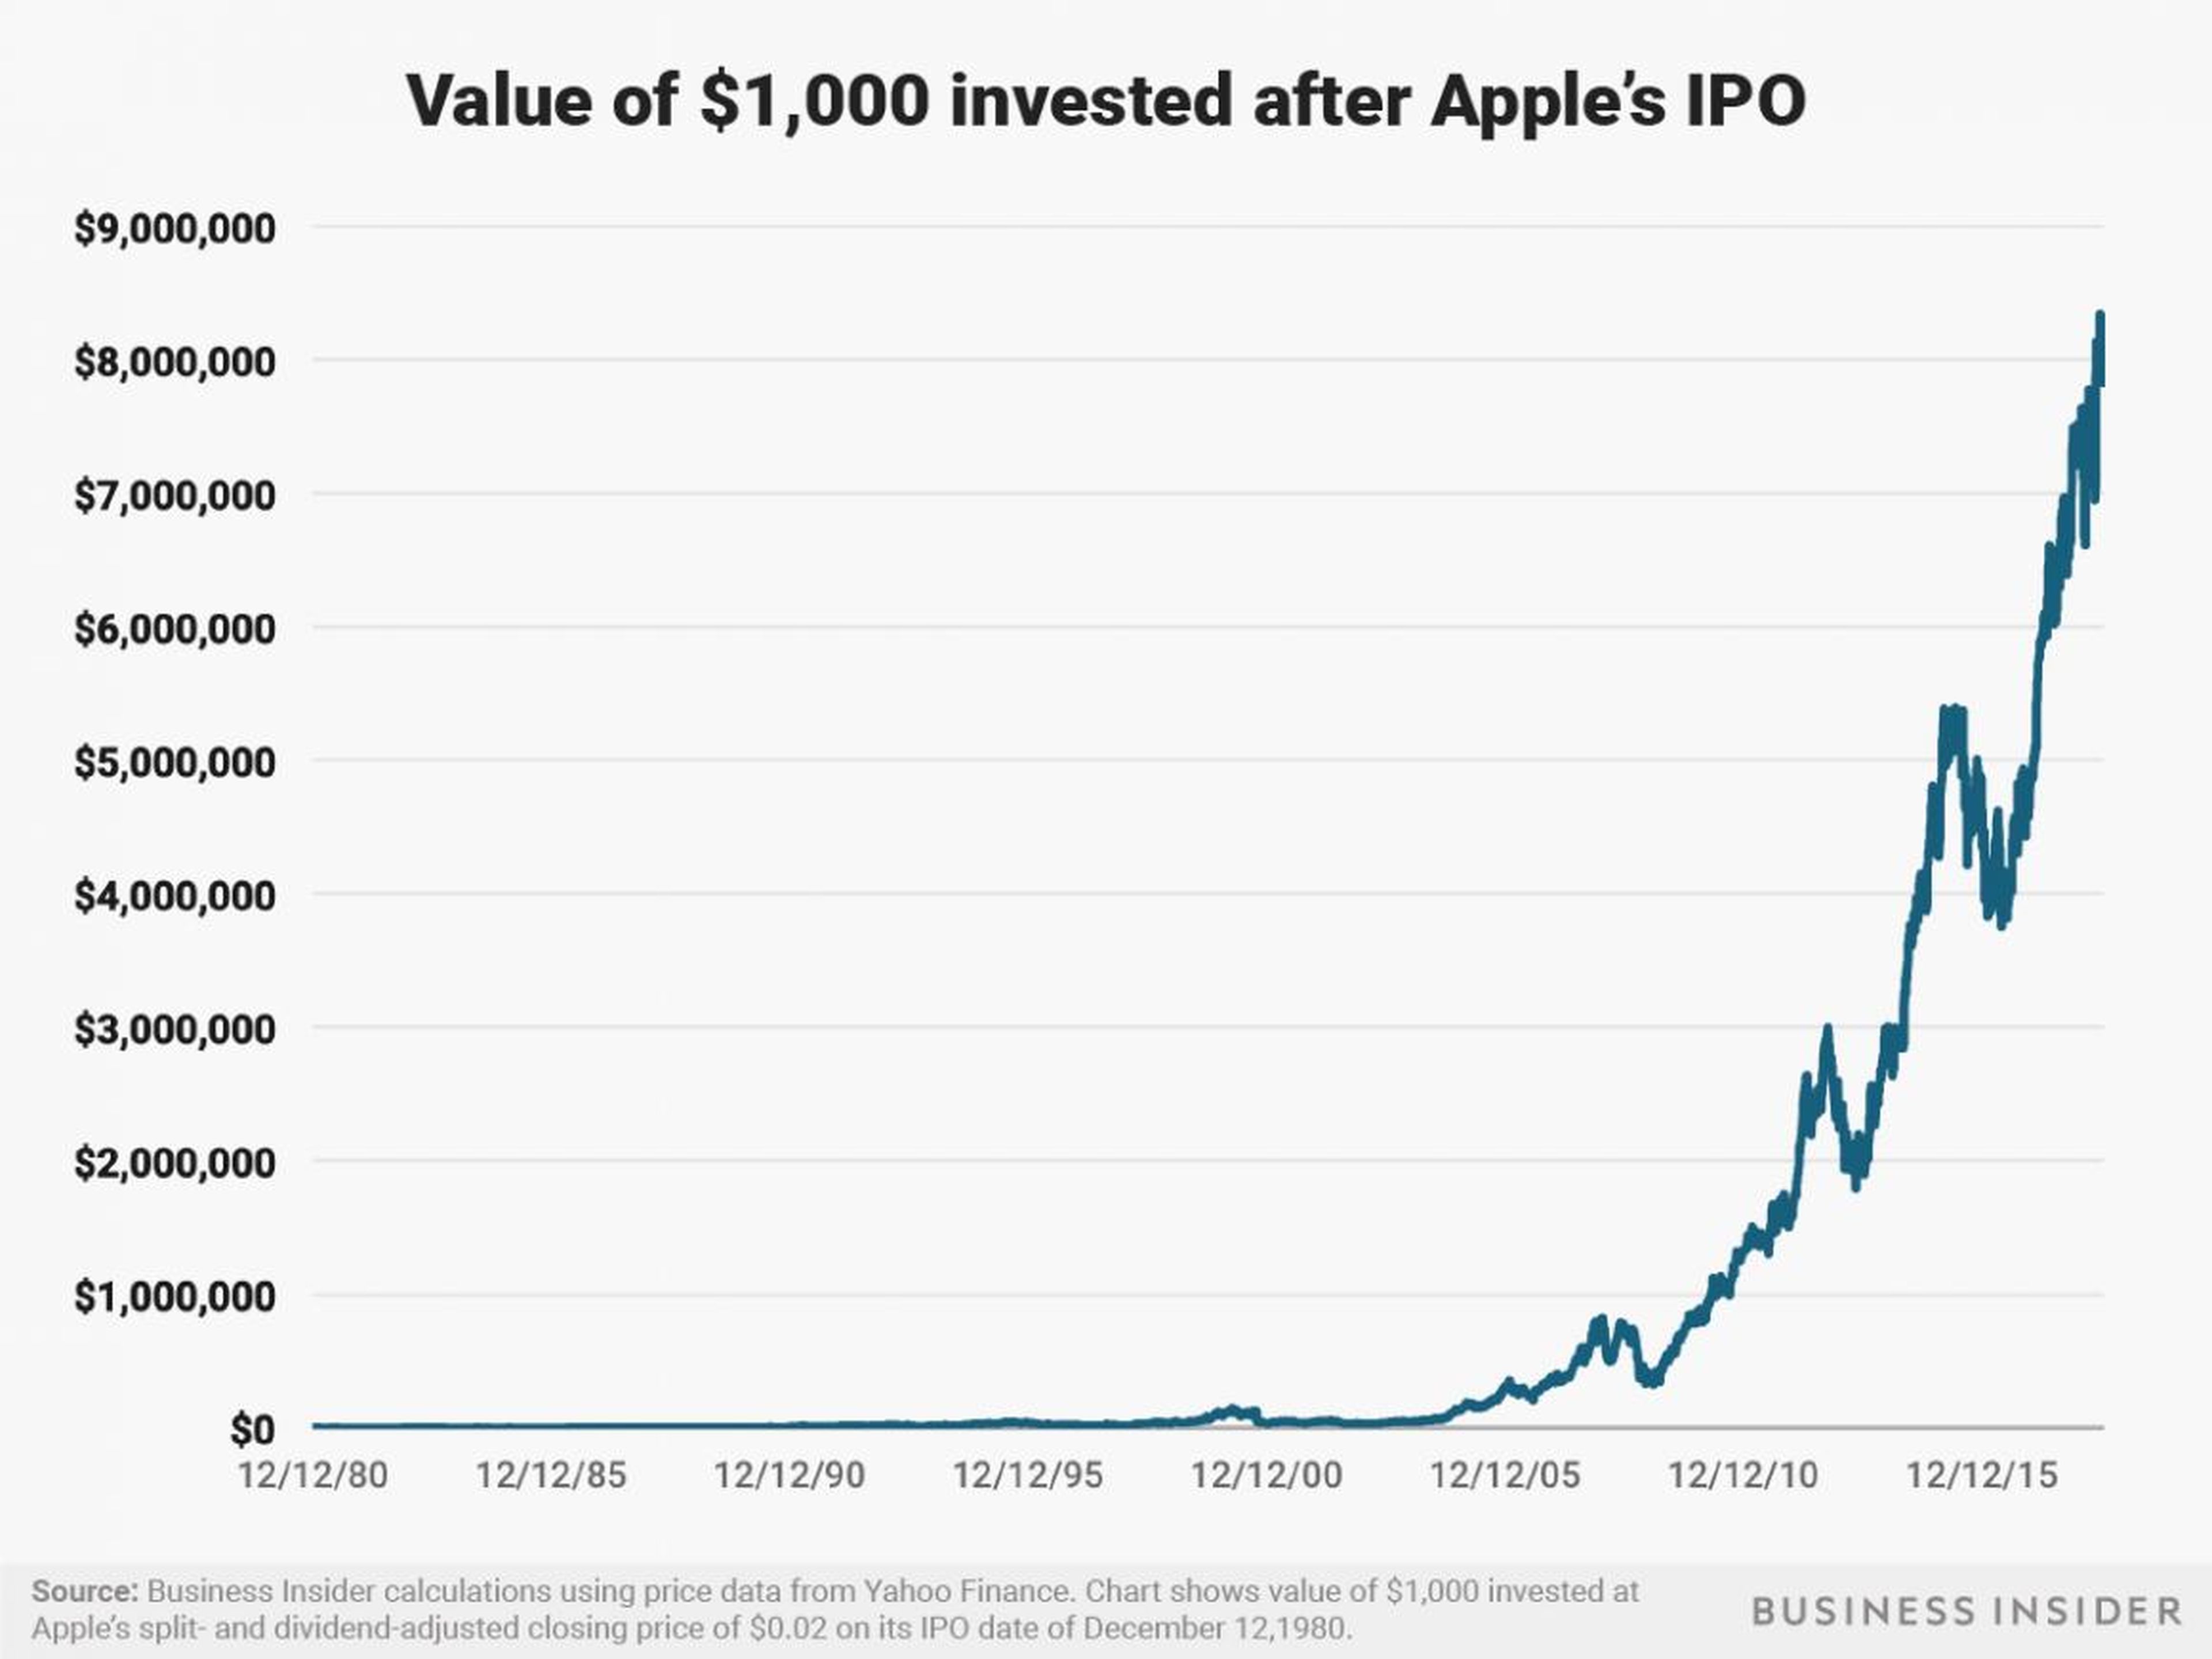 A $1,000 investment in Apple after its December 12, 1980 IPO would be worth around $8 million today.